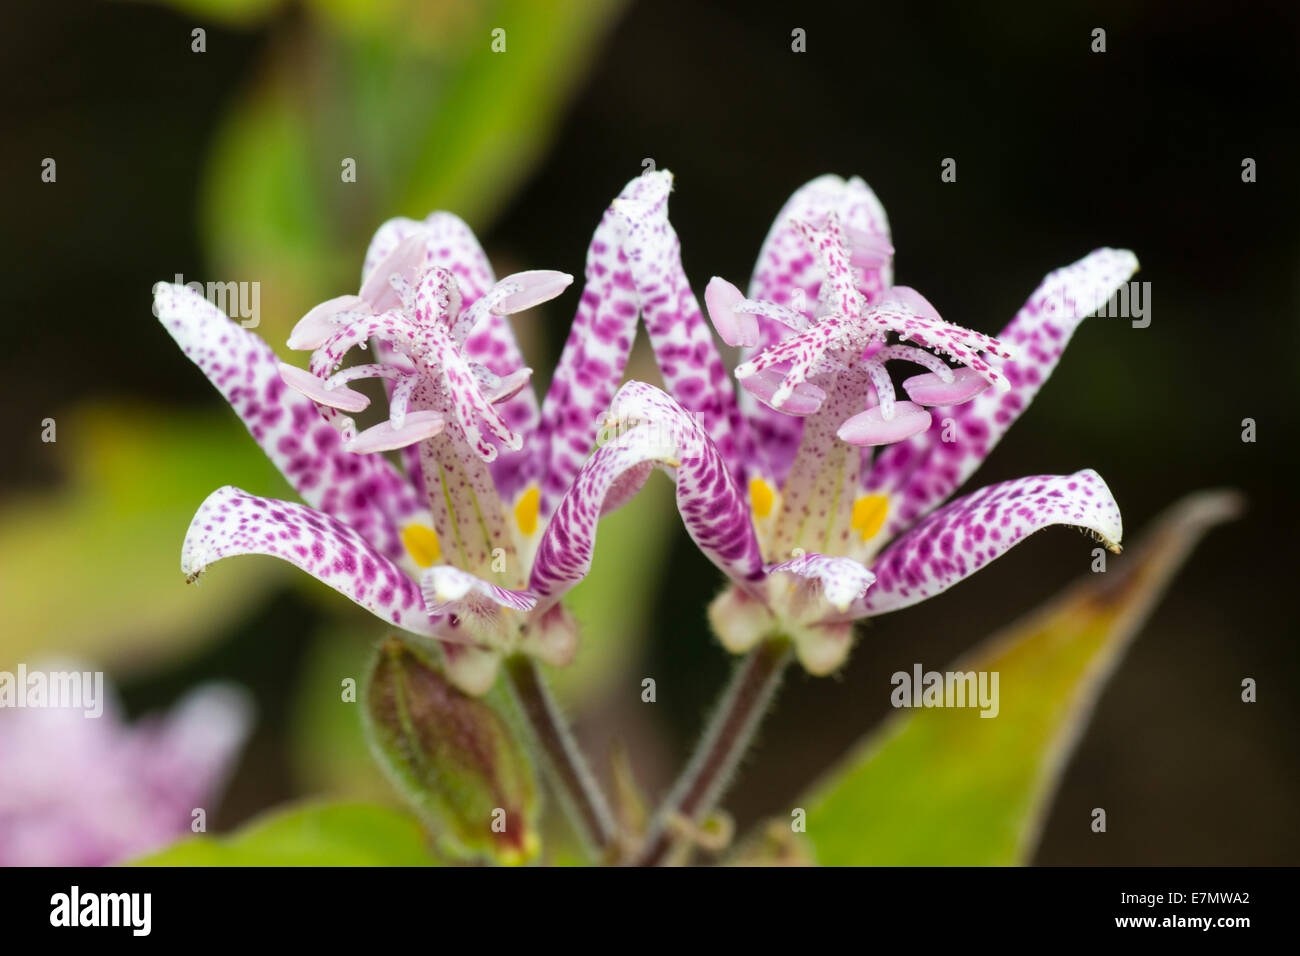 Flowers of the Autumn blooming toad lily, Tricyrtis 'Lilac Towers' Stock Photo